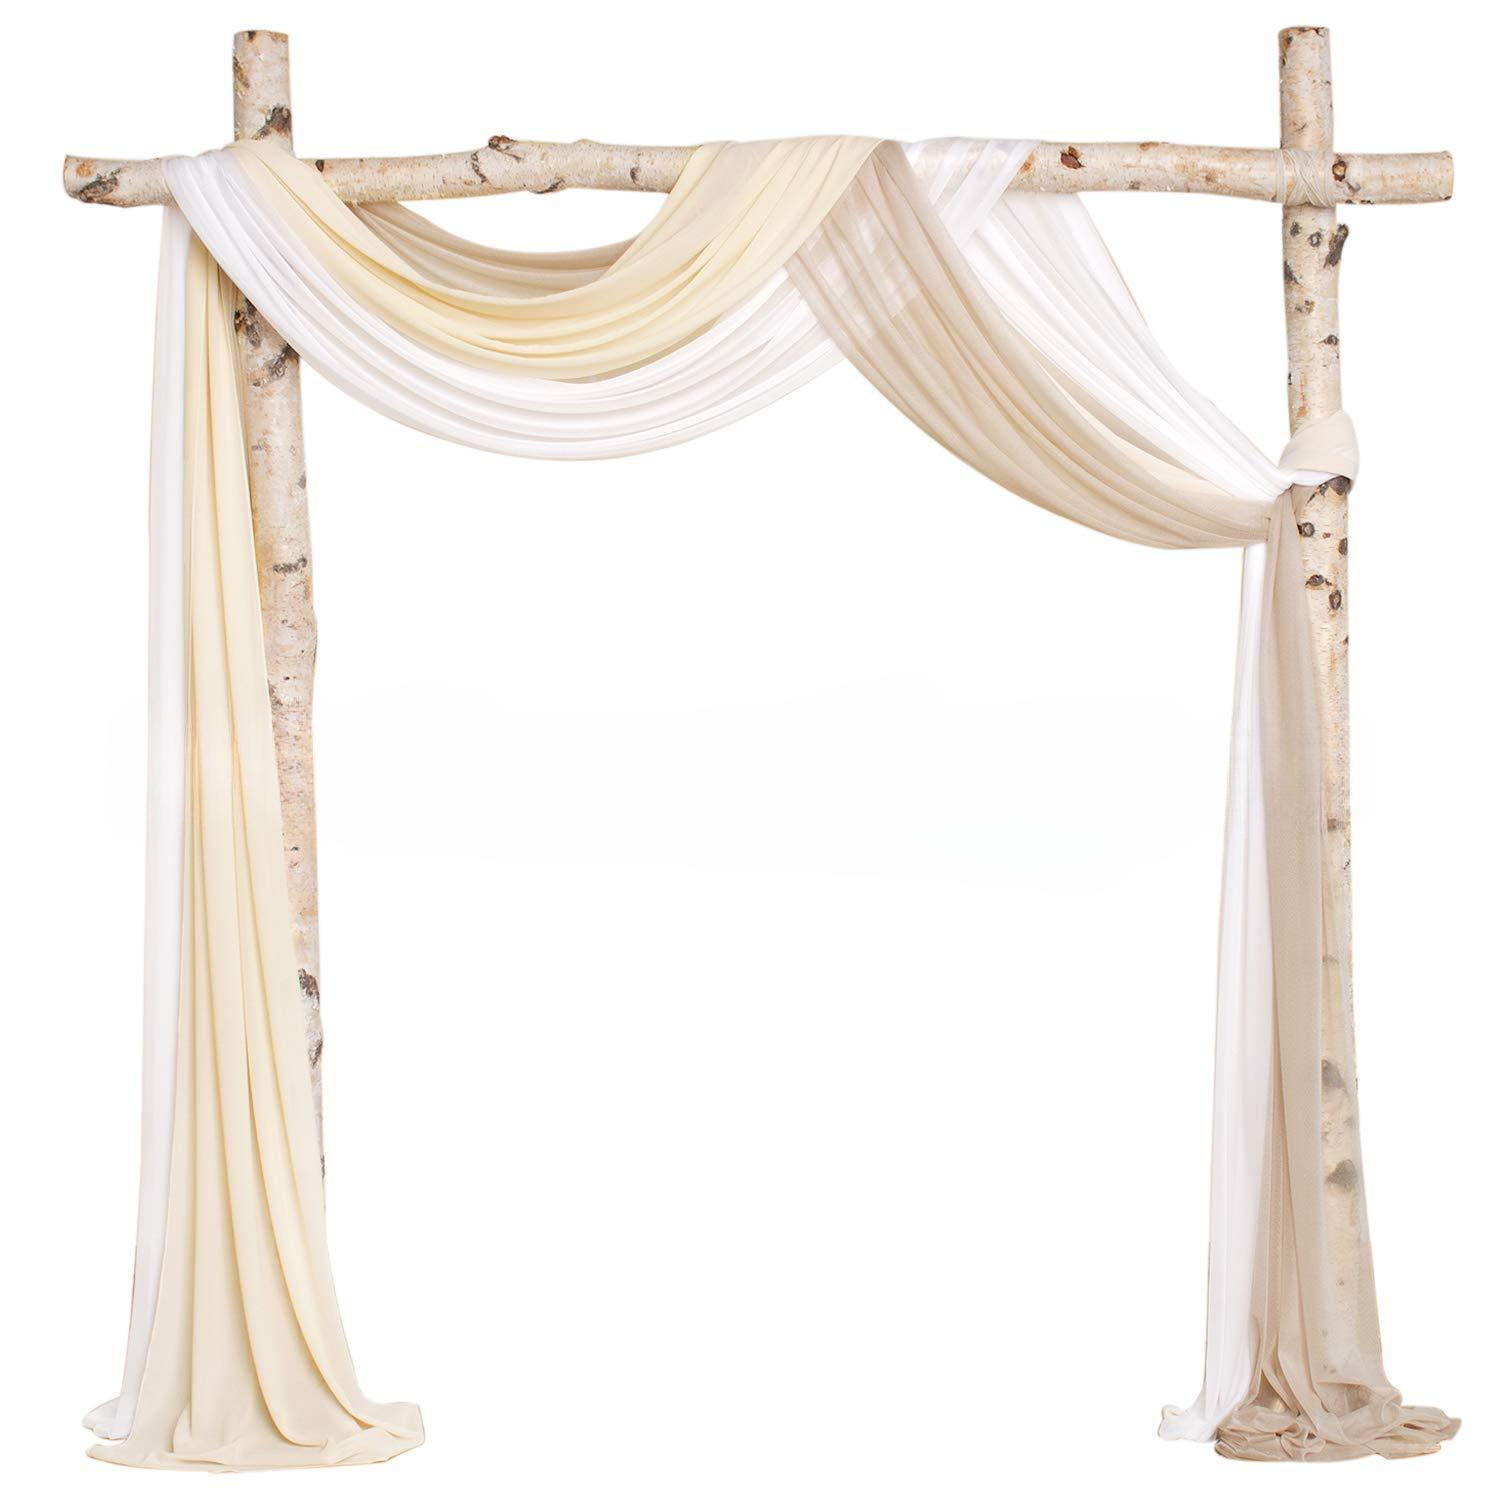 Pearl Chiffon Veil Valance Wedding Arch Backdrop Decoration Curtains for Weeding Parties Ceremony Photography Banquet Event Party